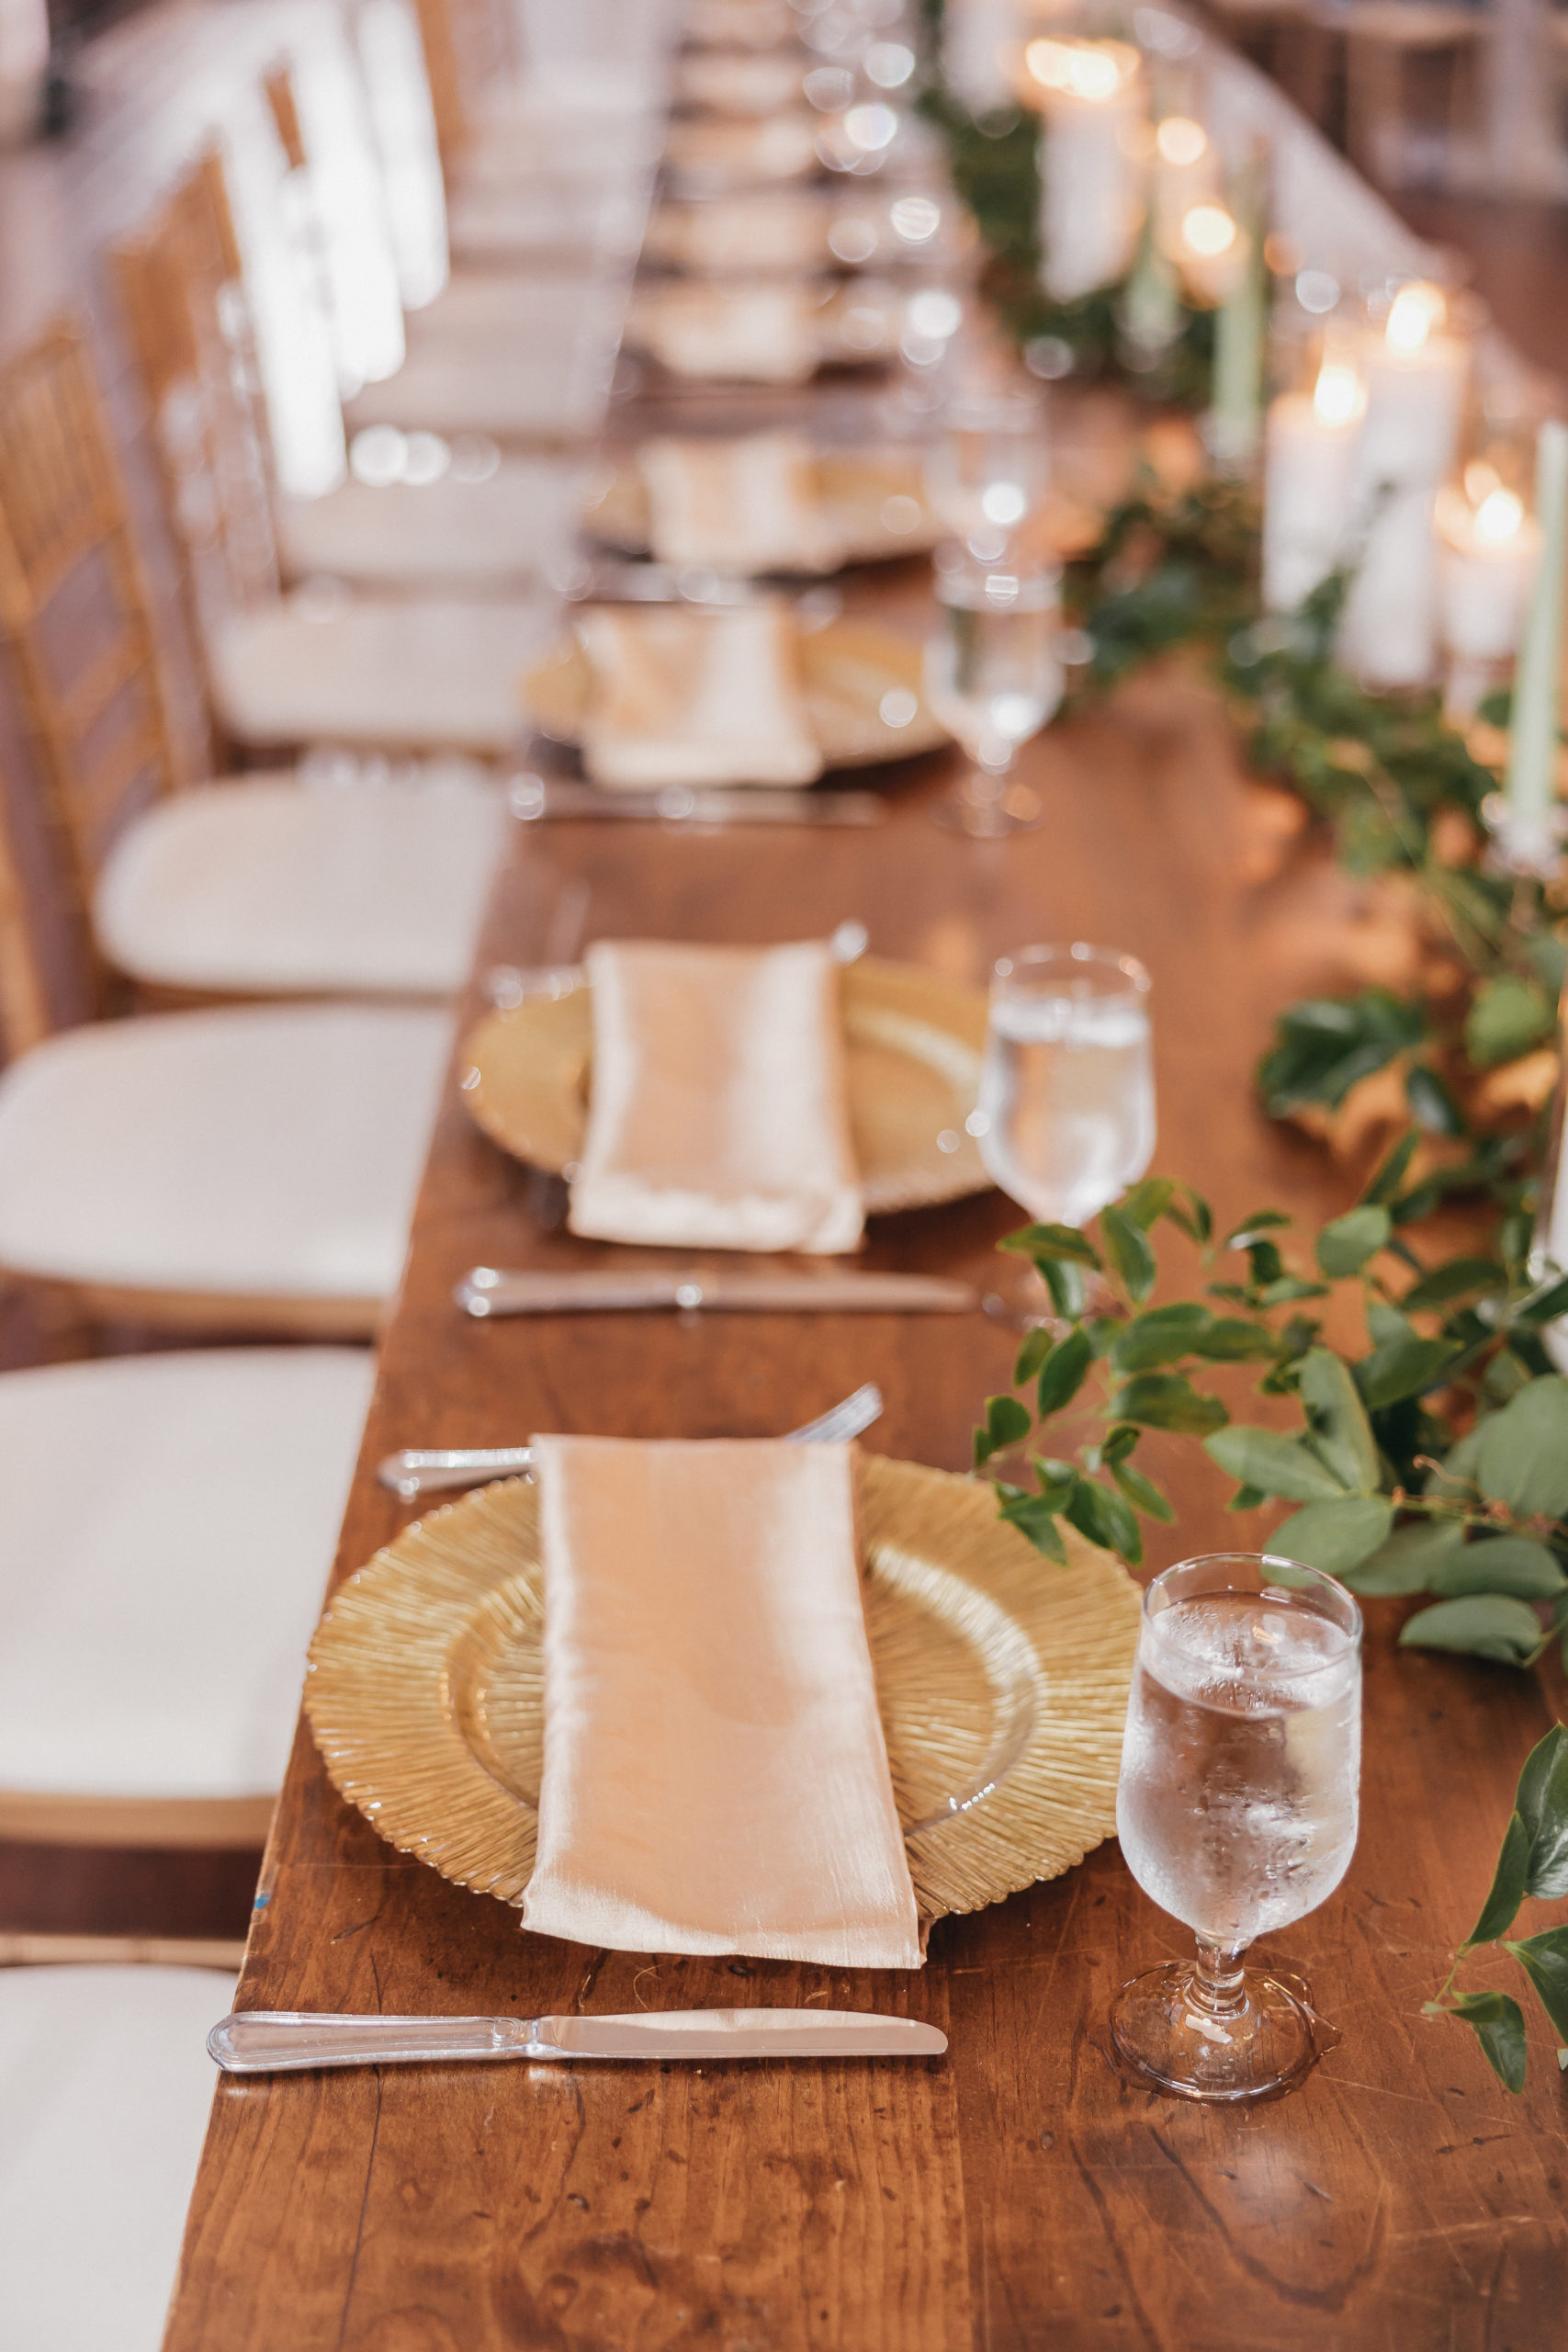 Big Spring Farm Wedding: A Complete Planning Guide. Close-up shot of wooden reception table with gold plates, silverware, glasses and plants.